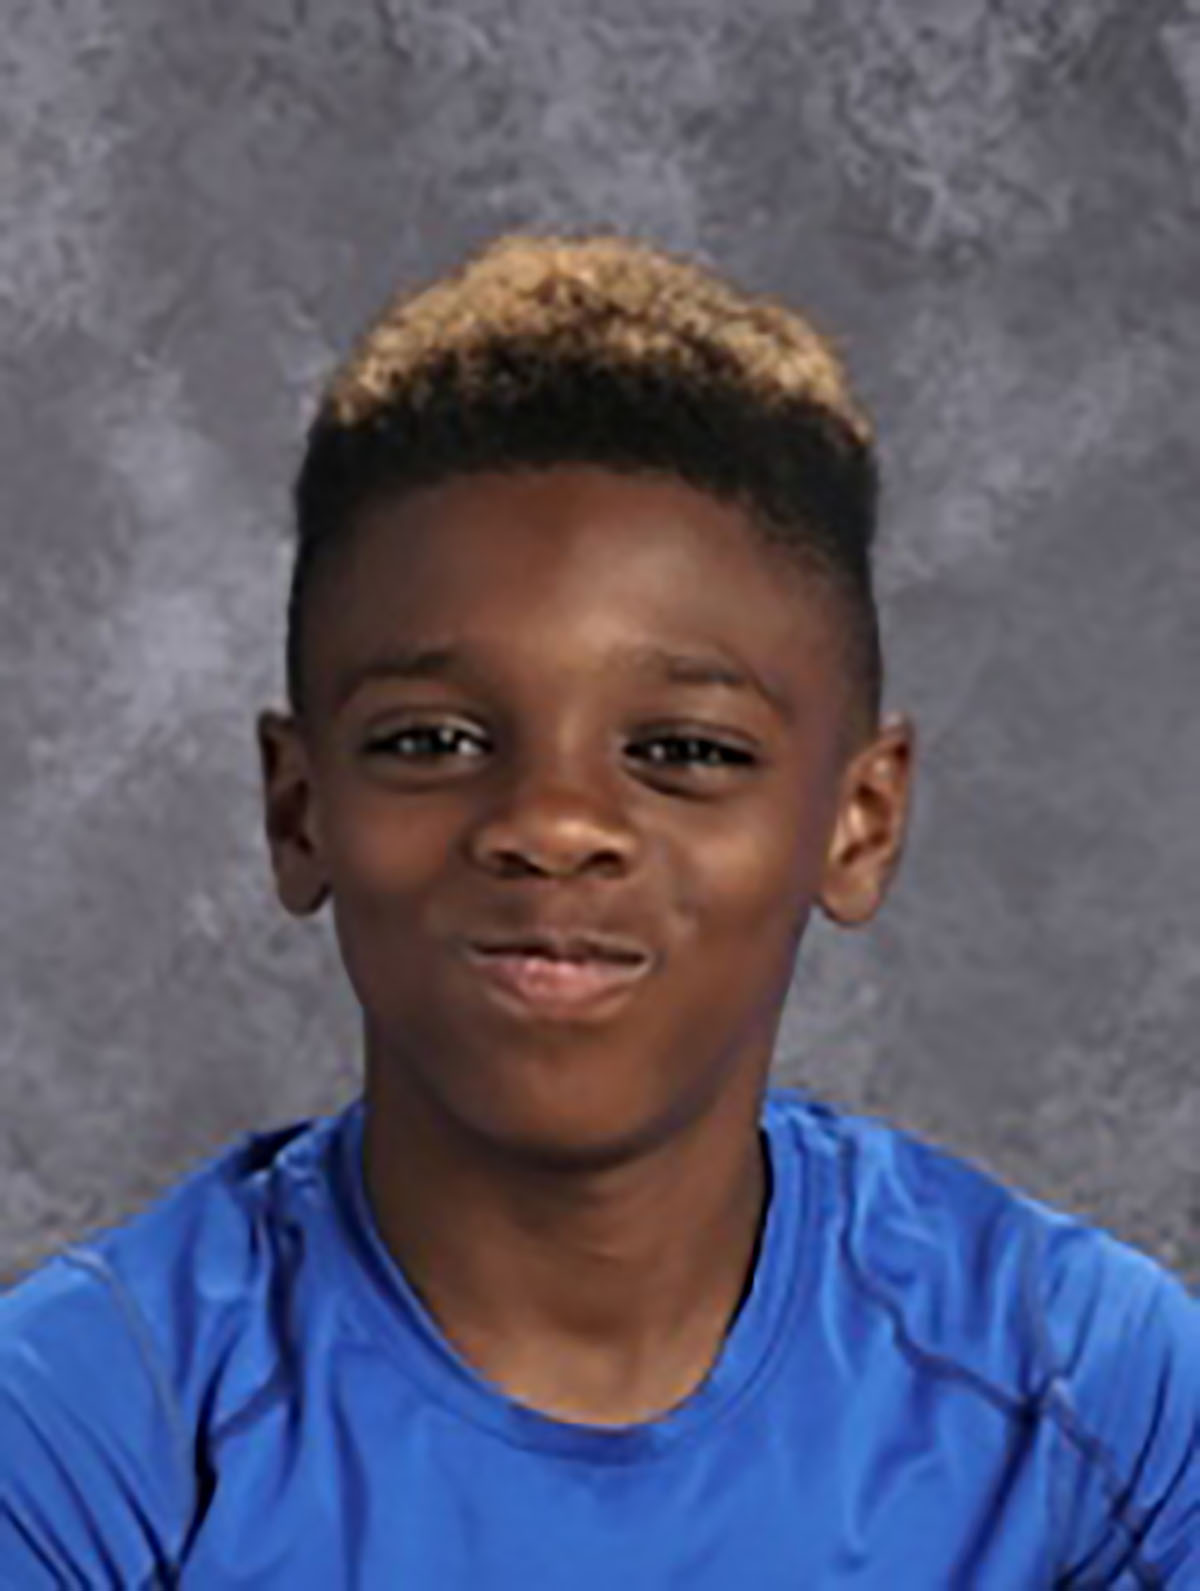 PHOTO: An undated photo of Jeremiah Myers, 11, who was found dead in an apartment in Troy, N.Y., Dec. 26, 2017.